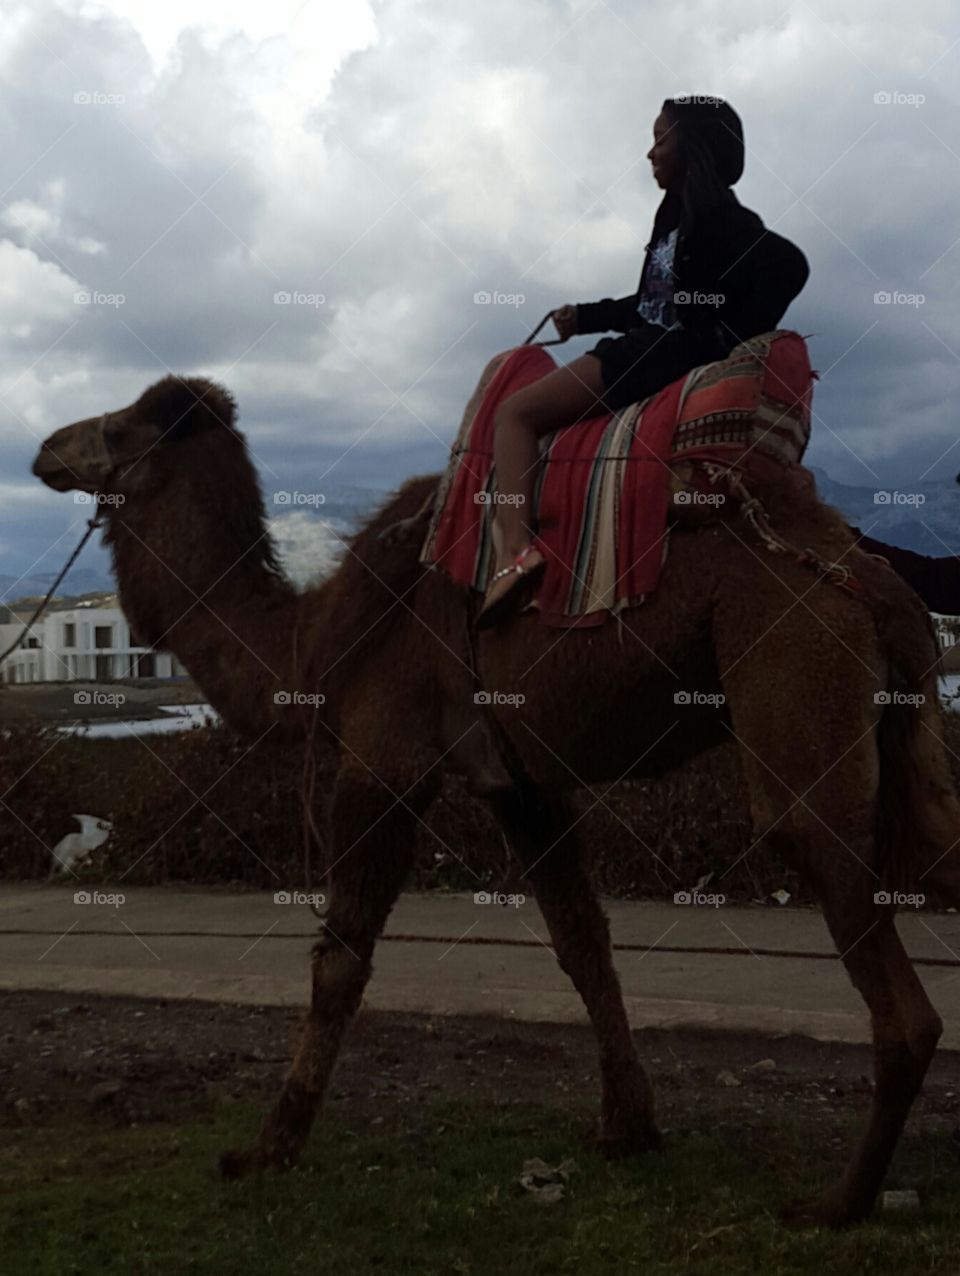 You haven't lived if you've never rode a camel.